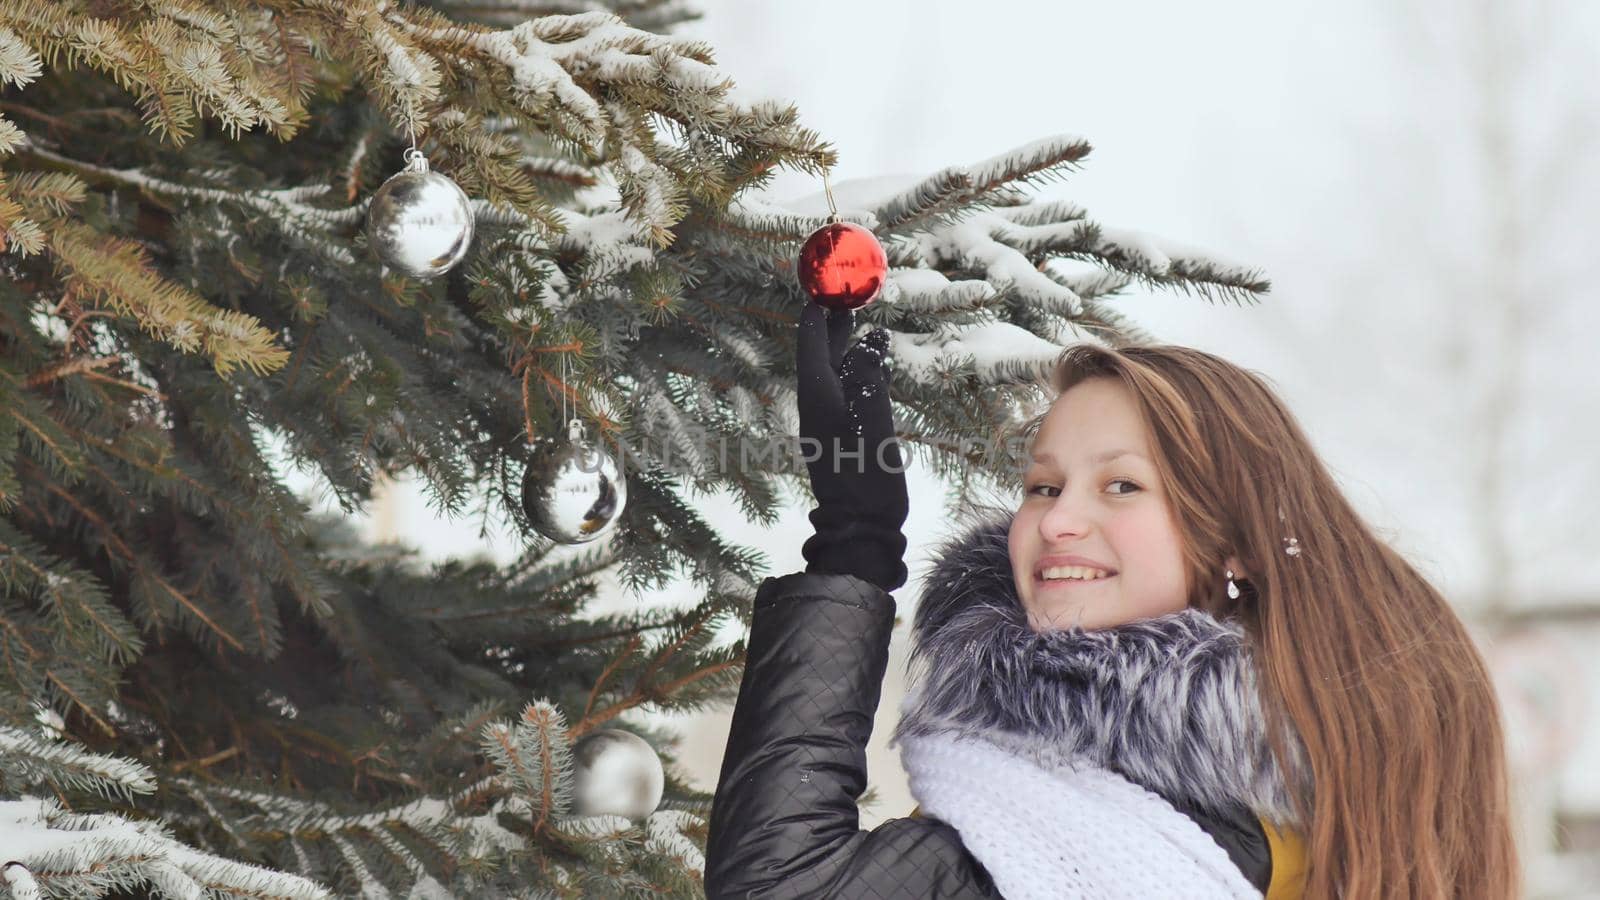 Attractive young girl with long hair in a winter suit posing against a snowy tree. A girl is stringing Christmas balls on a branch. Winter in the forest. by DovidPro